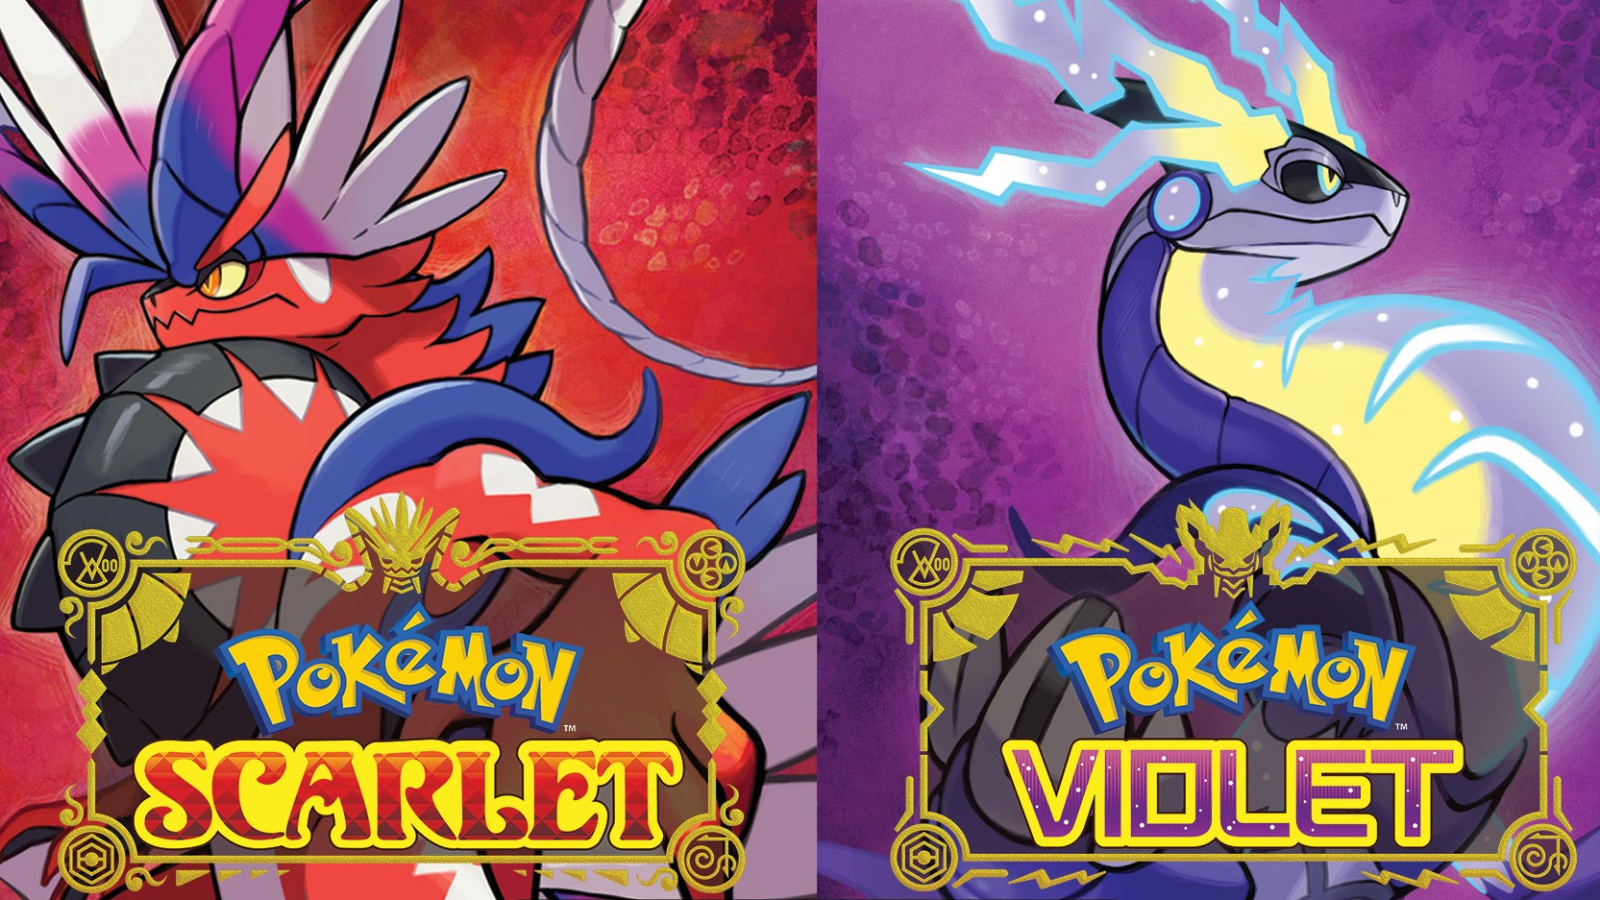 DLC for Pokémon Scarlet and Violet has gone Live today